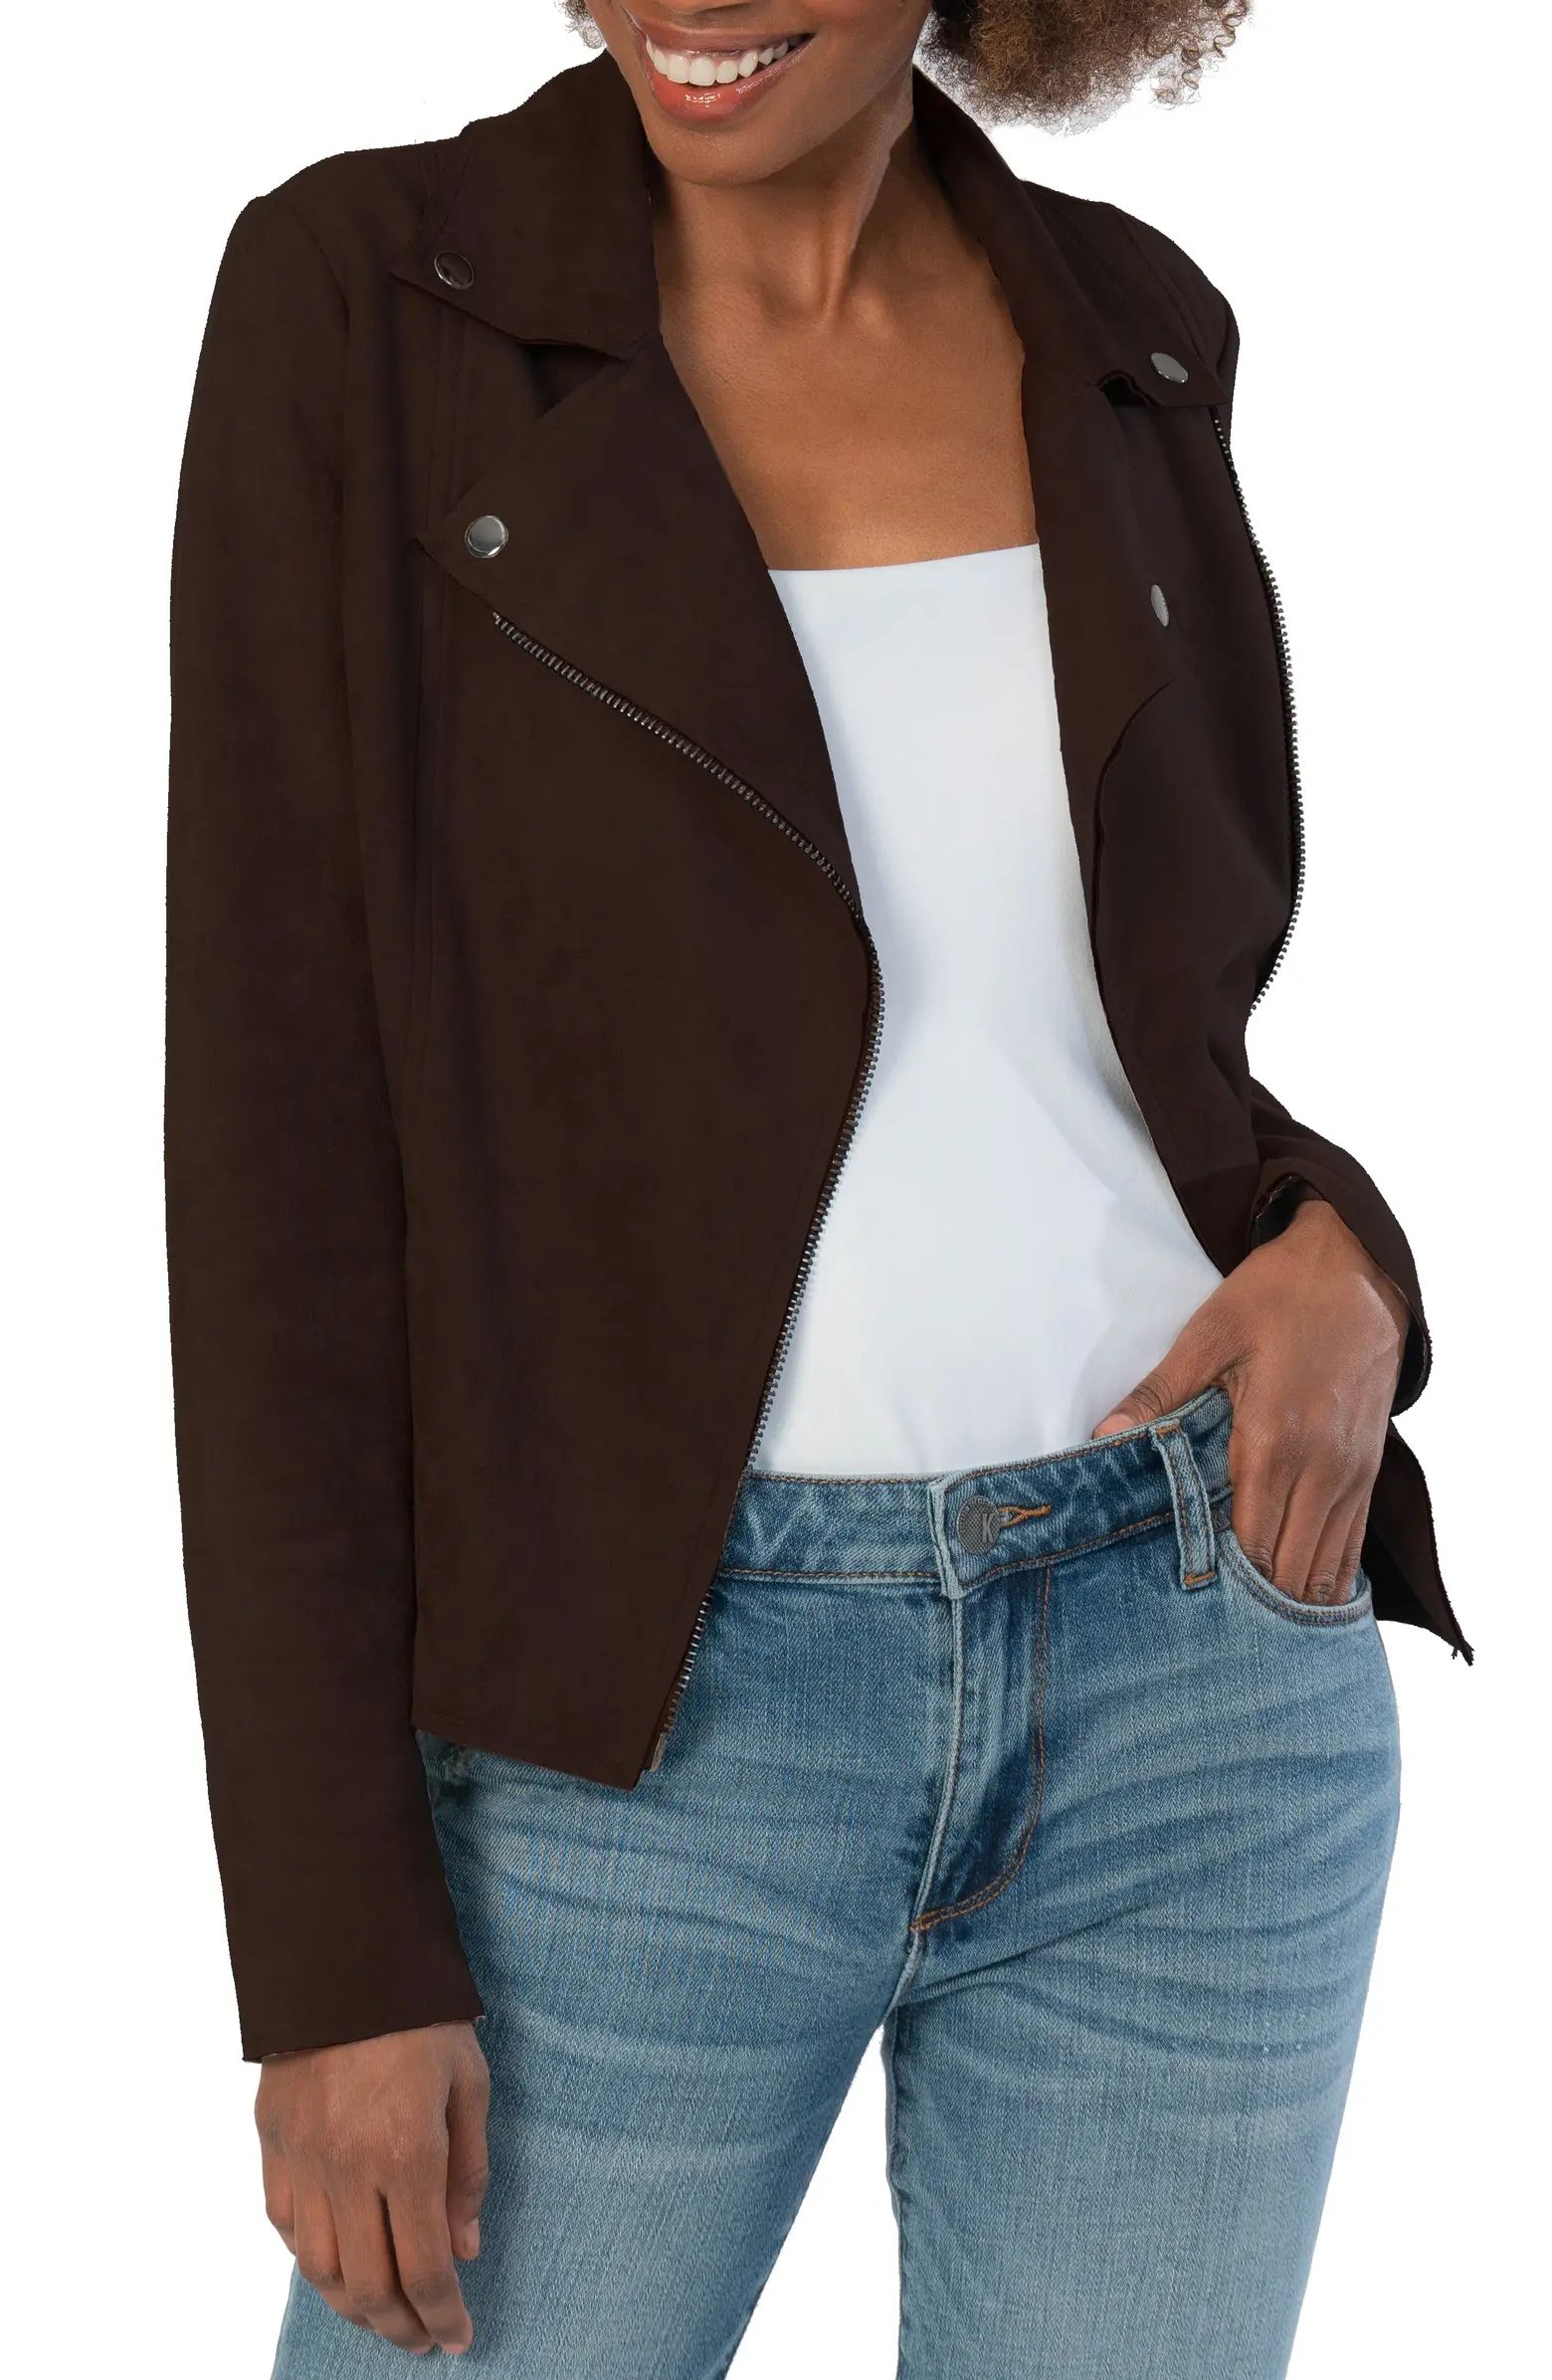 KUT from the Kloth Milana Faux Suede Moto Jacket | Nordstrom | Nordstrom